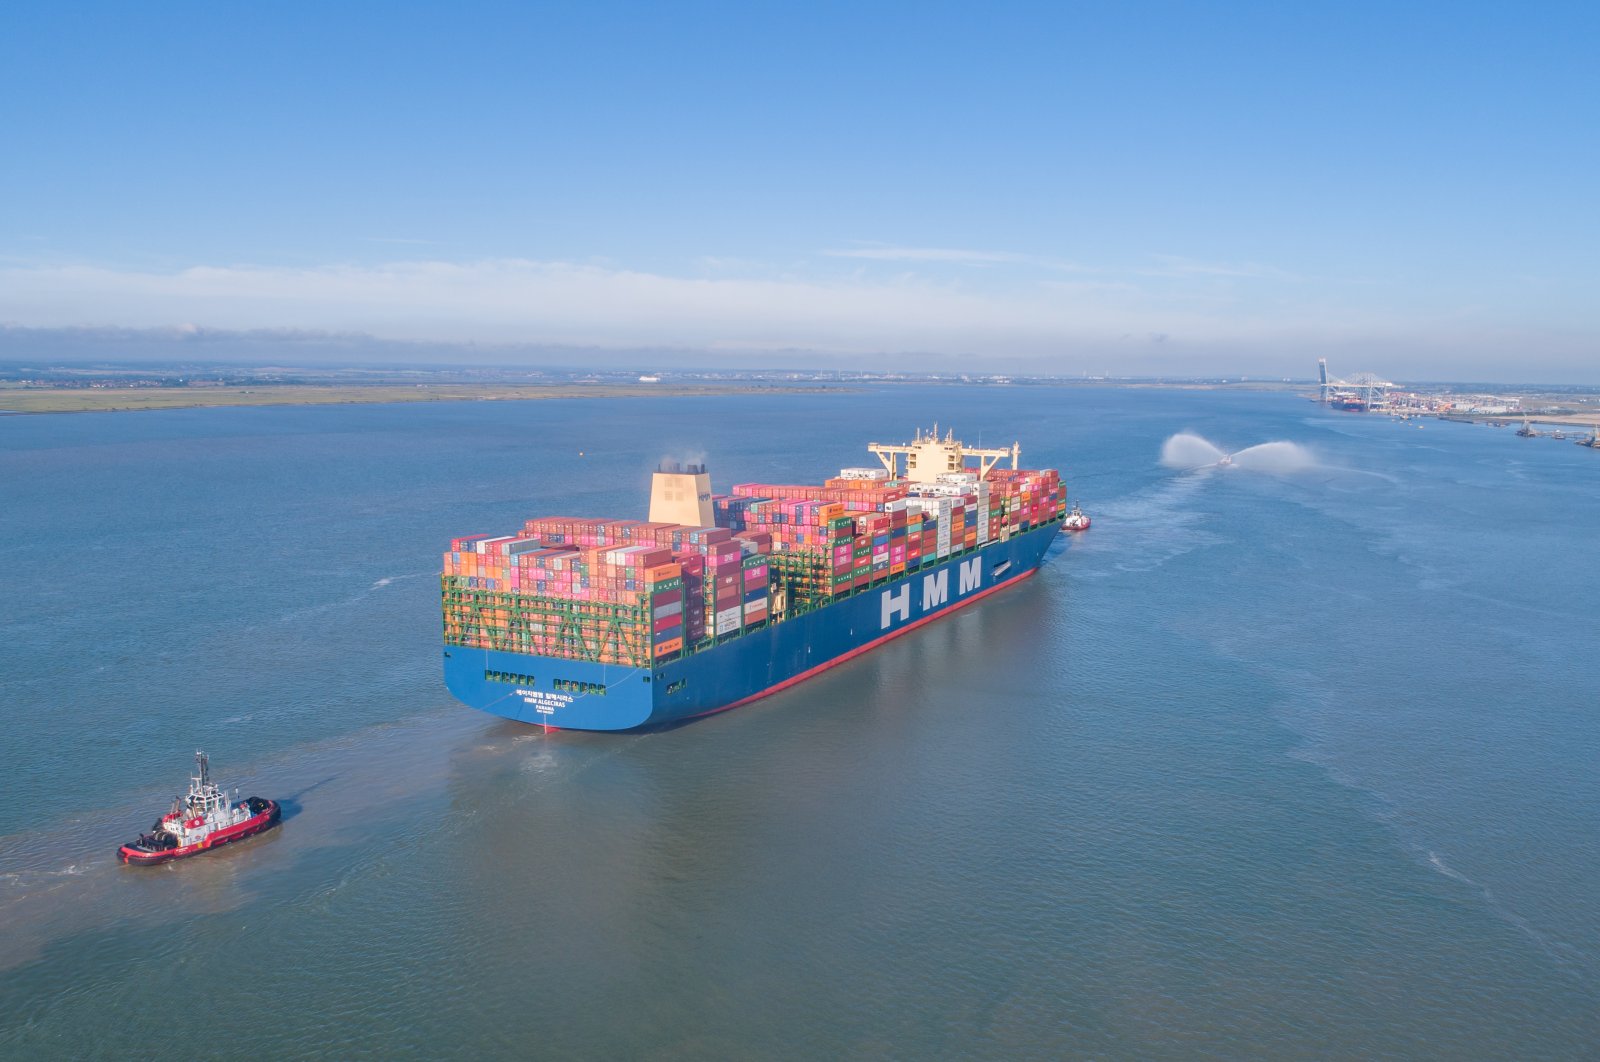 The biggest container ship in the world, the HMM Algeciras, arrives at DP World Gateway Port in Essex, Britain, June 14, 2020. (Shutterstock Photo)